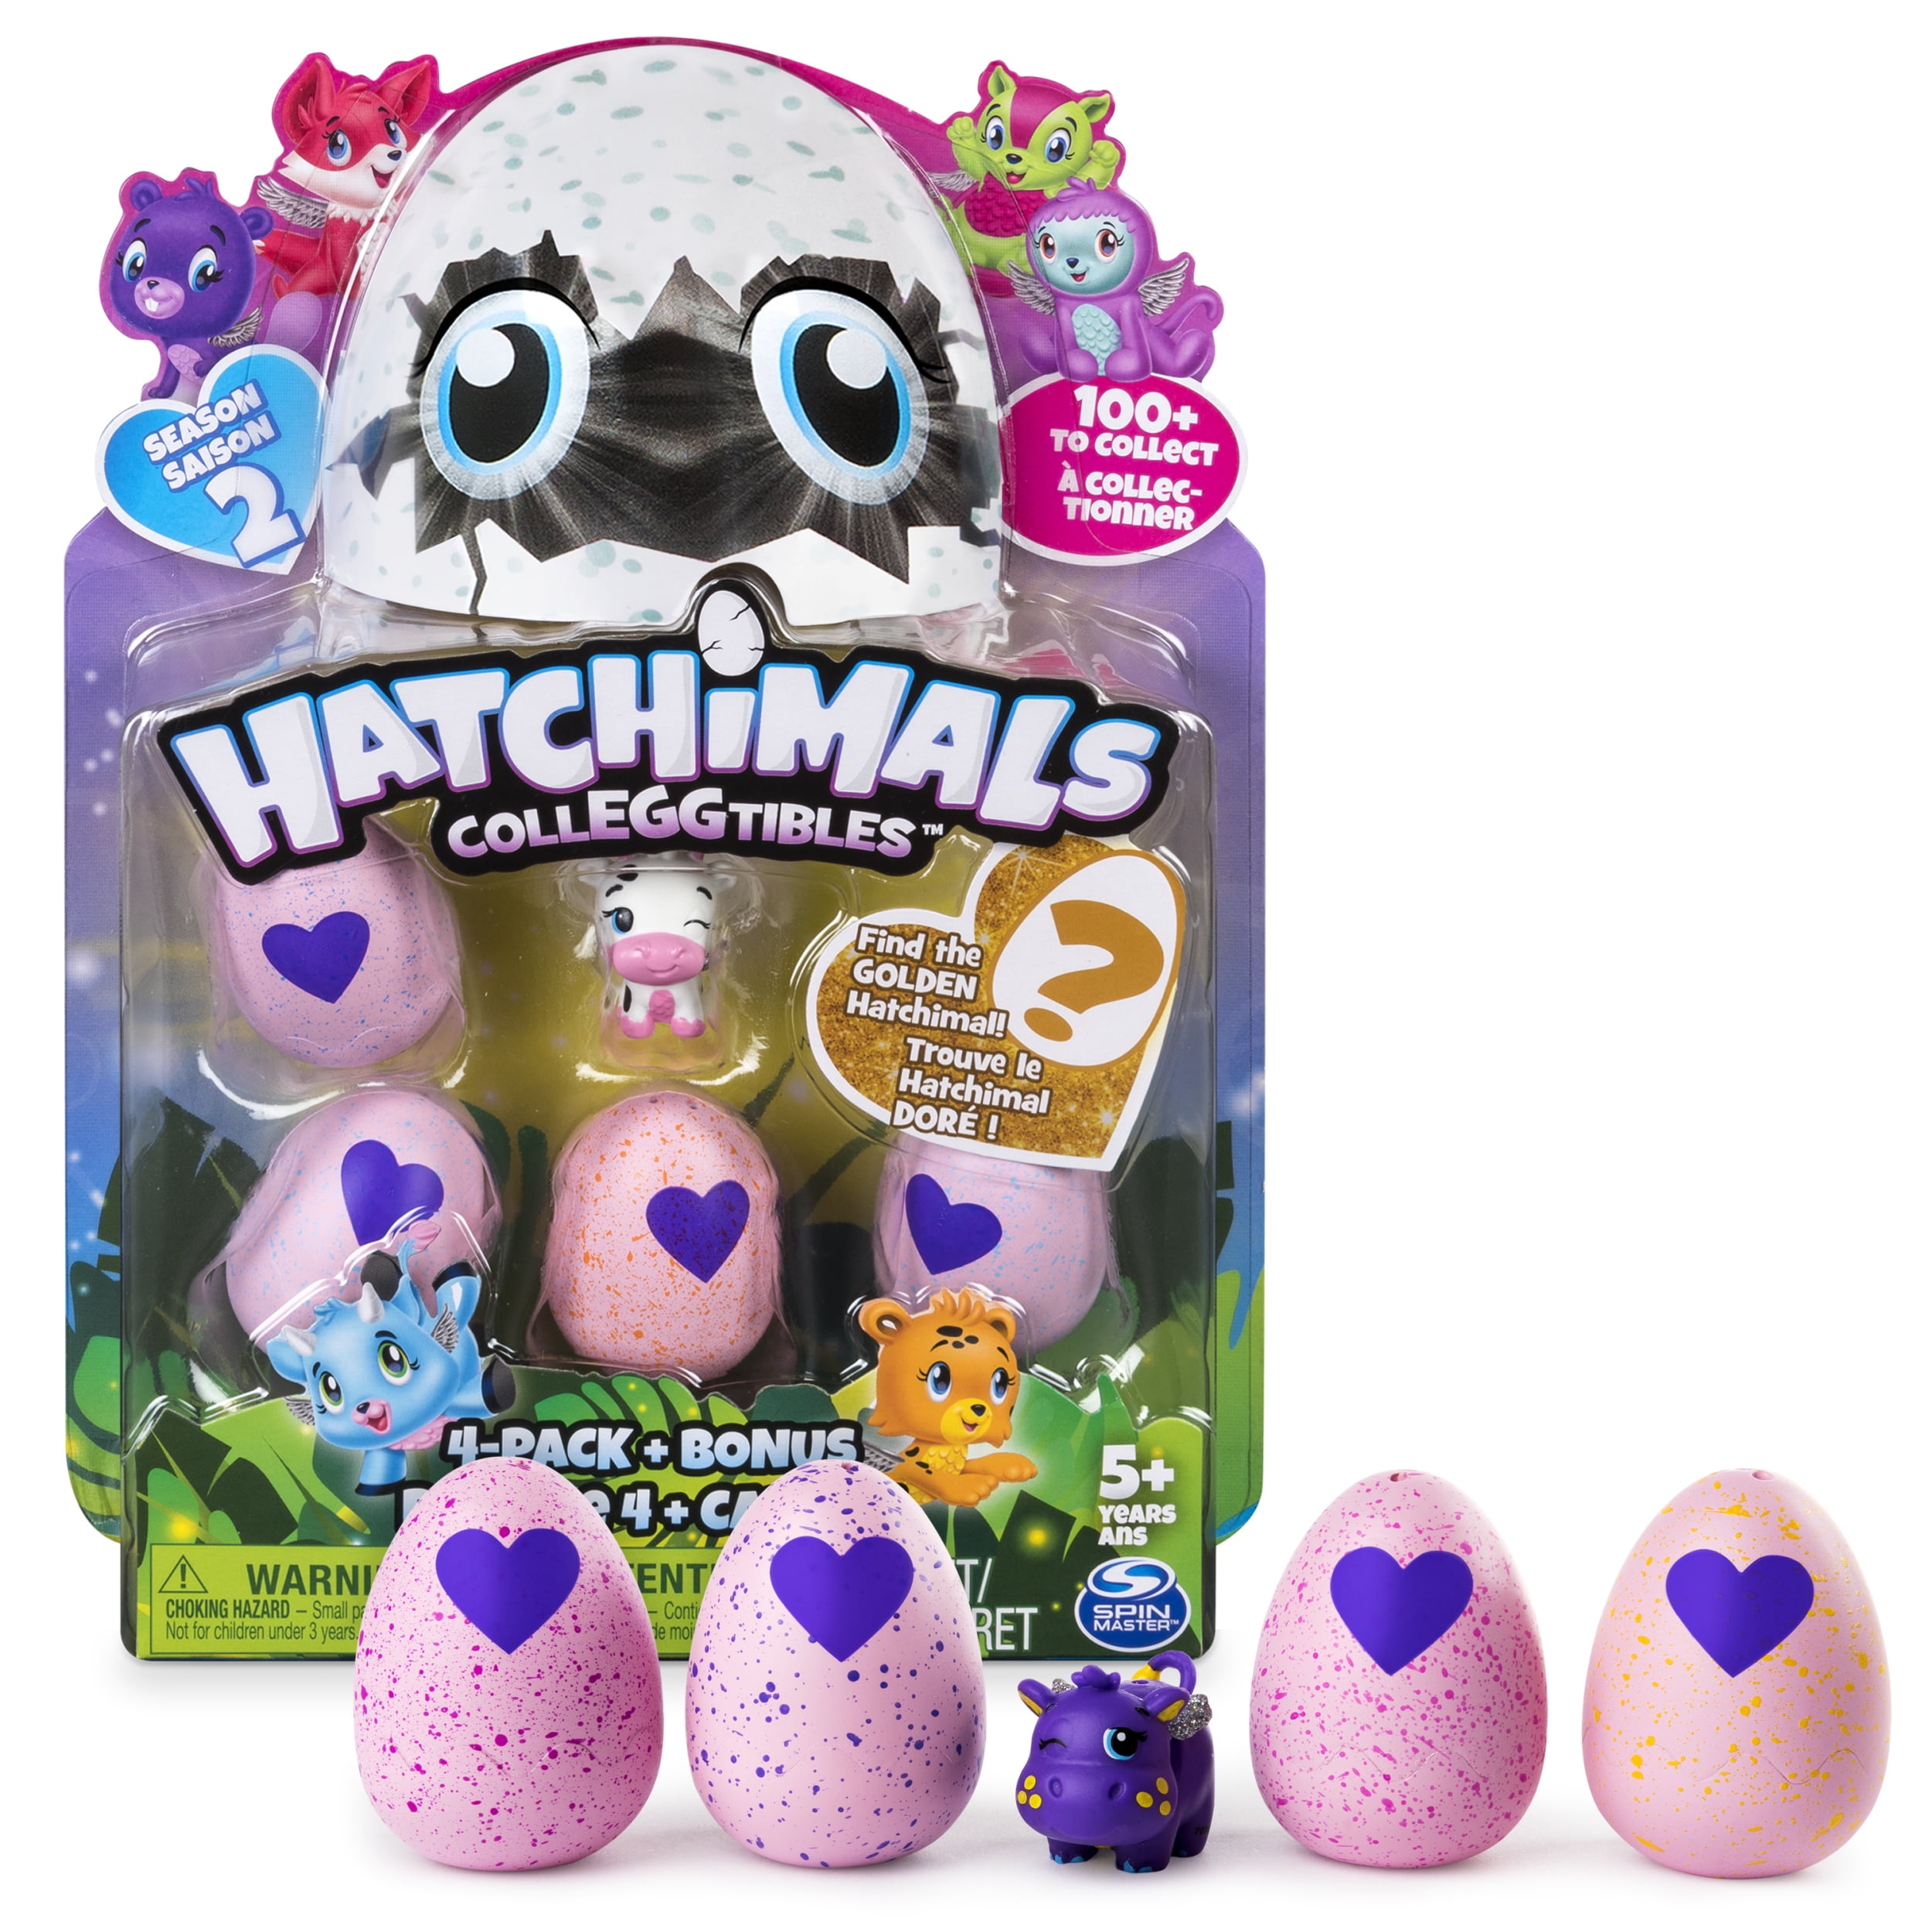 Hatchimals CollEGGtibles 4-Pack Bonus by Spin... Styles & Colors May Vary 